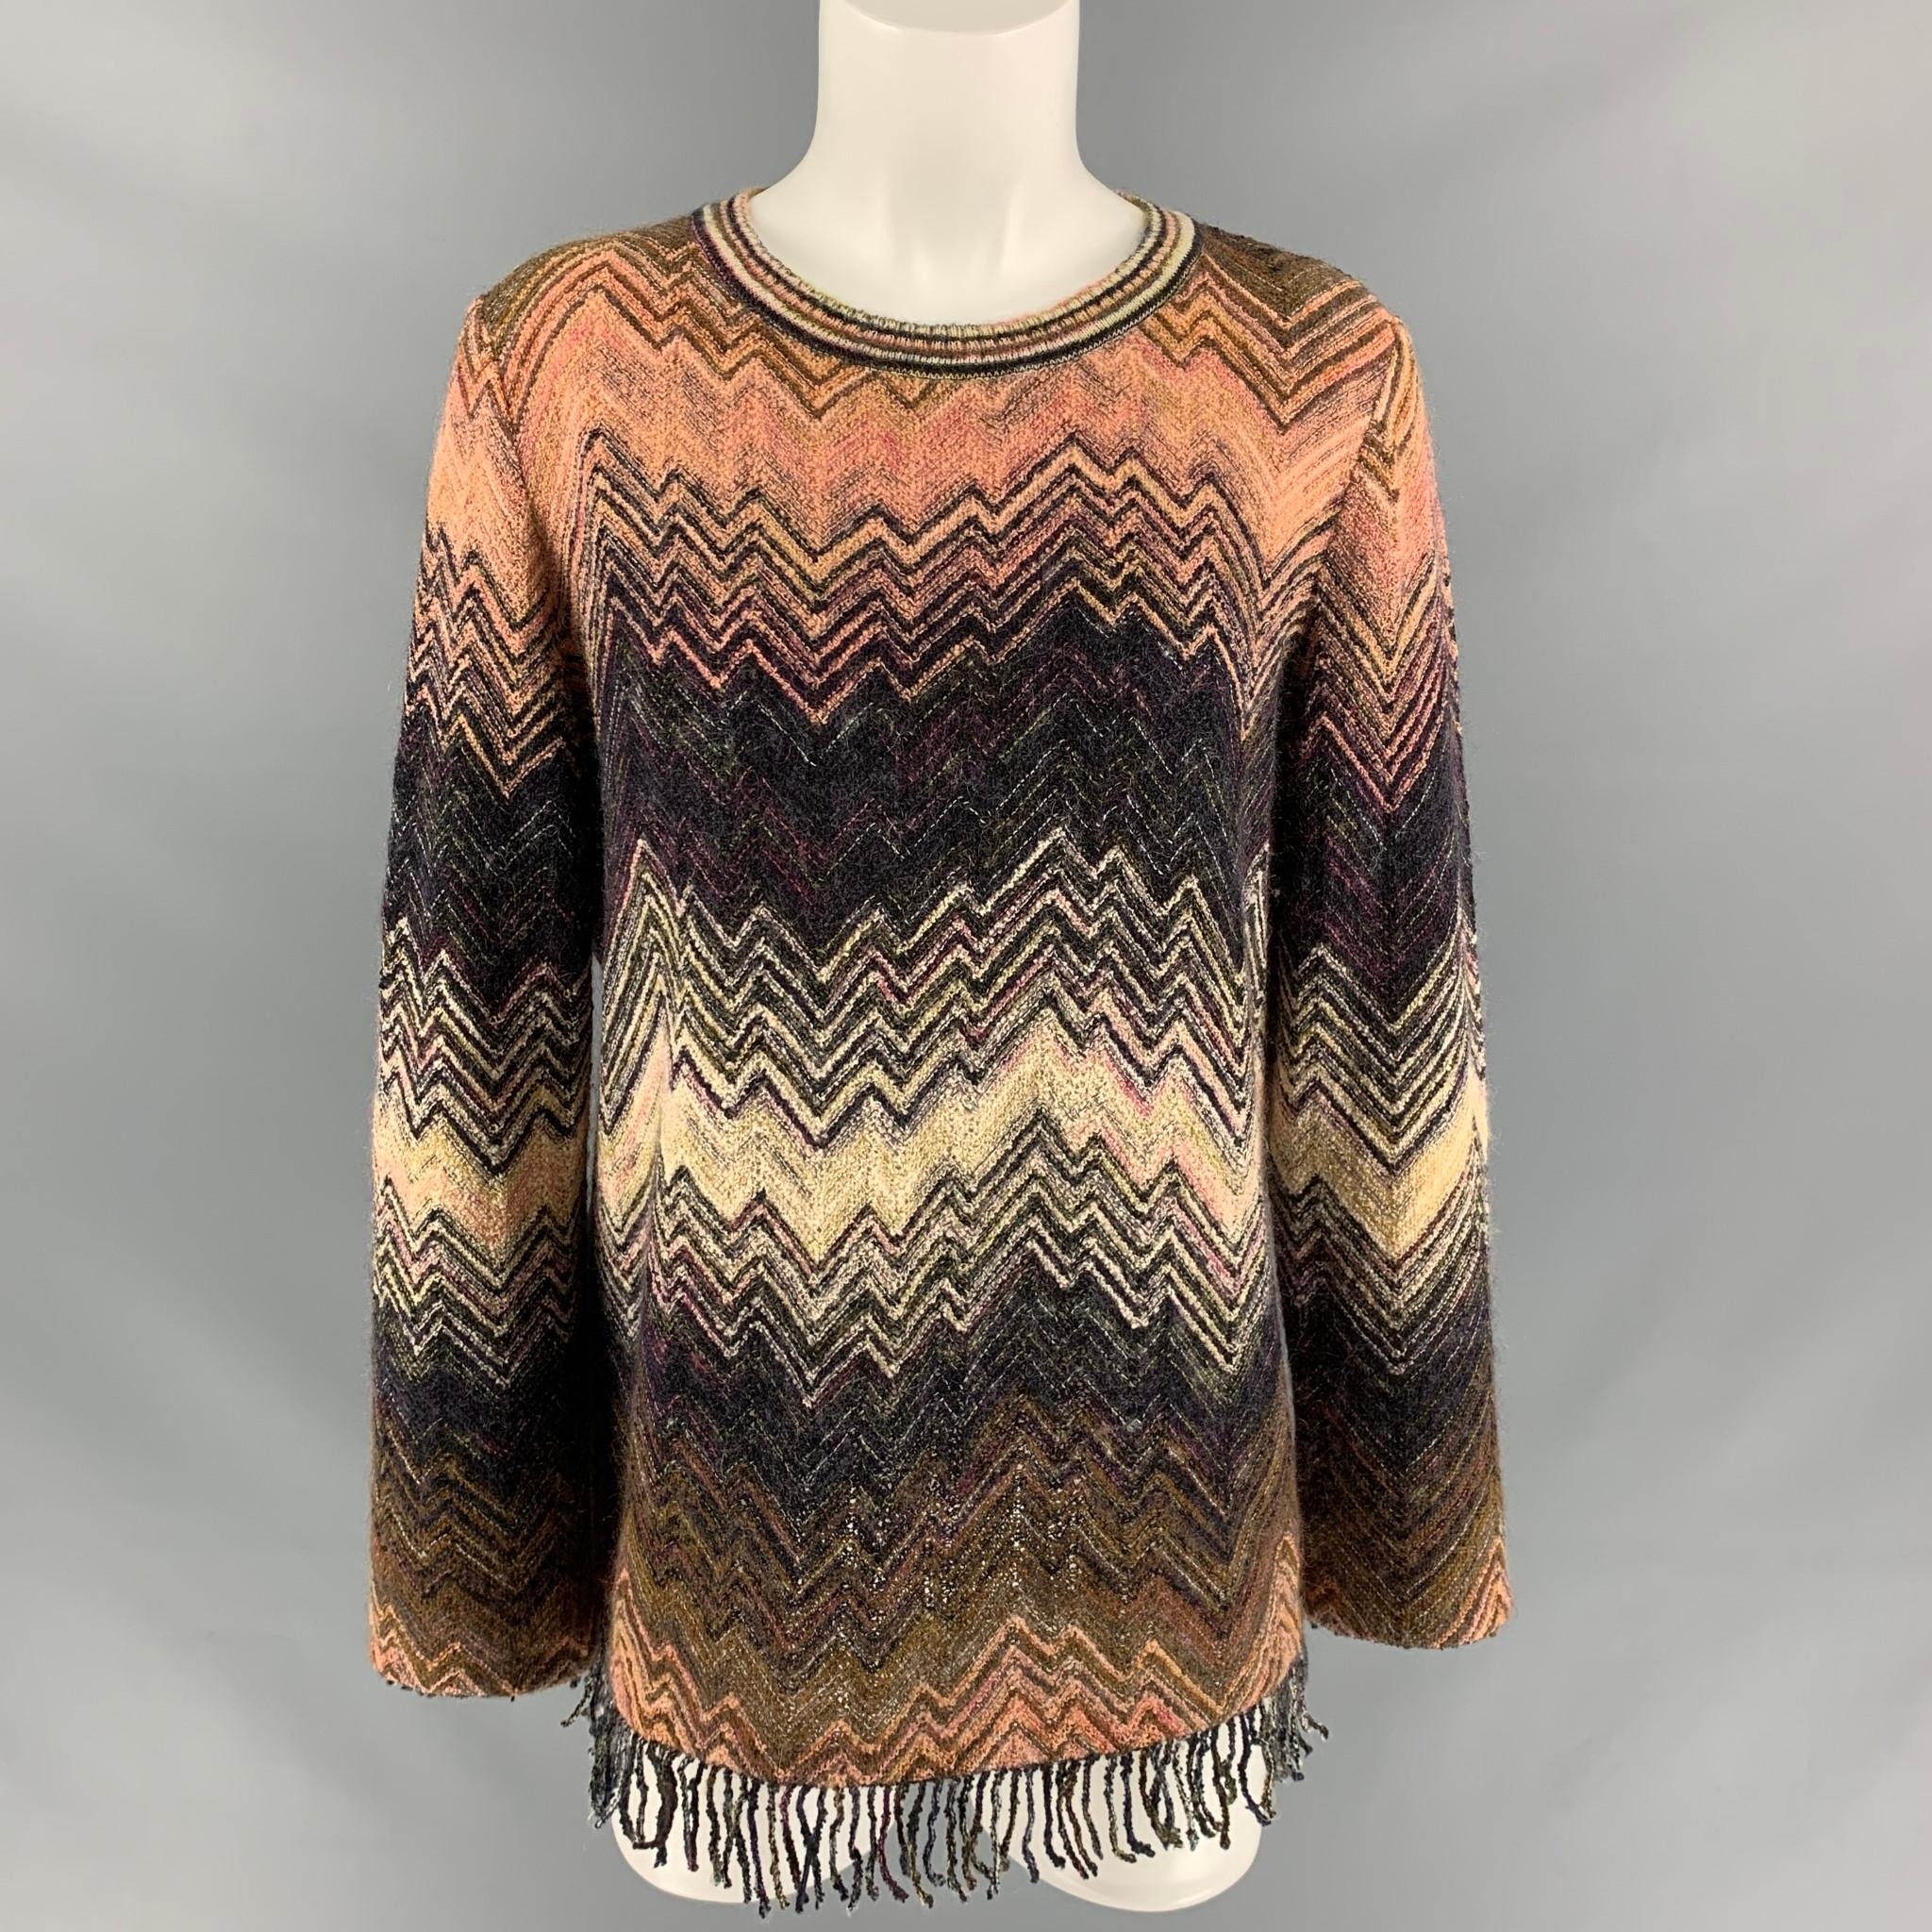 MISSONI sweater comes in a multi-color wool blend knitted featuring a zig zag pattern , round neckline, and fringe at bottom hem. Made in Italy.

Excellent Pre-Owned Condition. Fabric tag removed.
Marked: 46

Measurements:

Shoulder: 17 in
Bust: 46